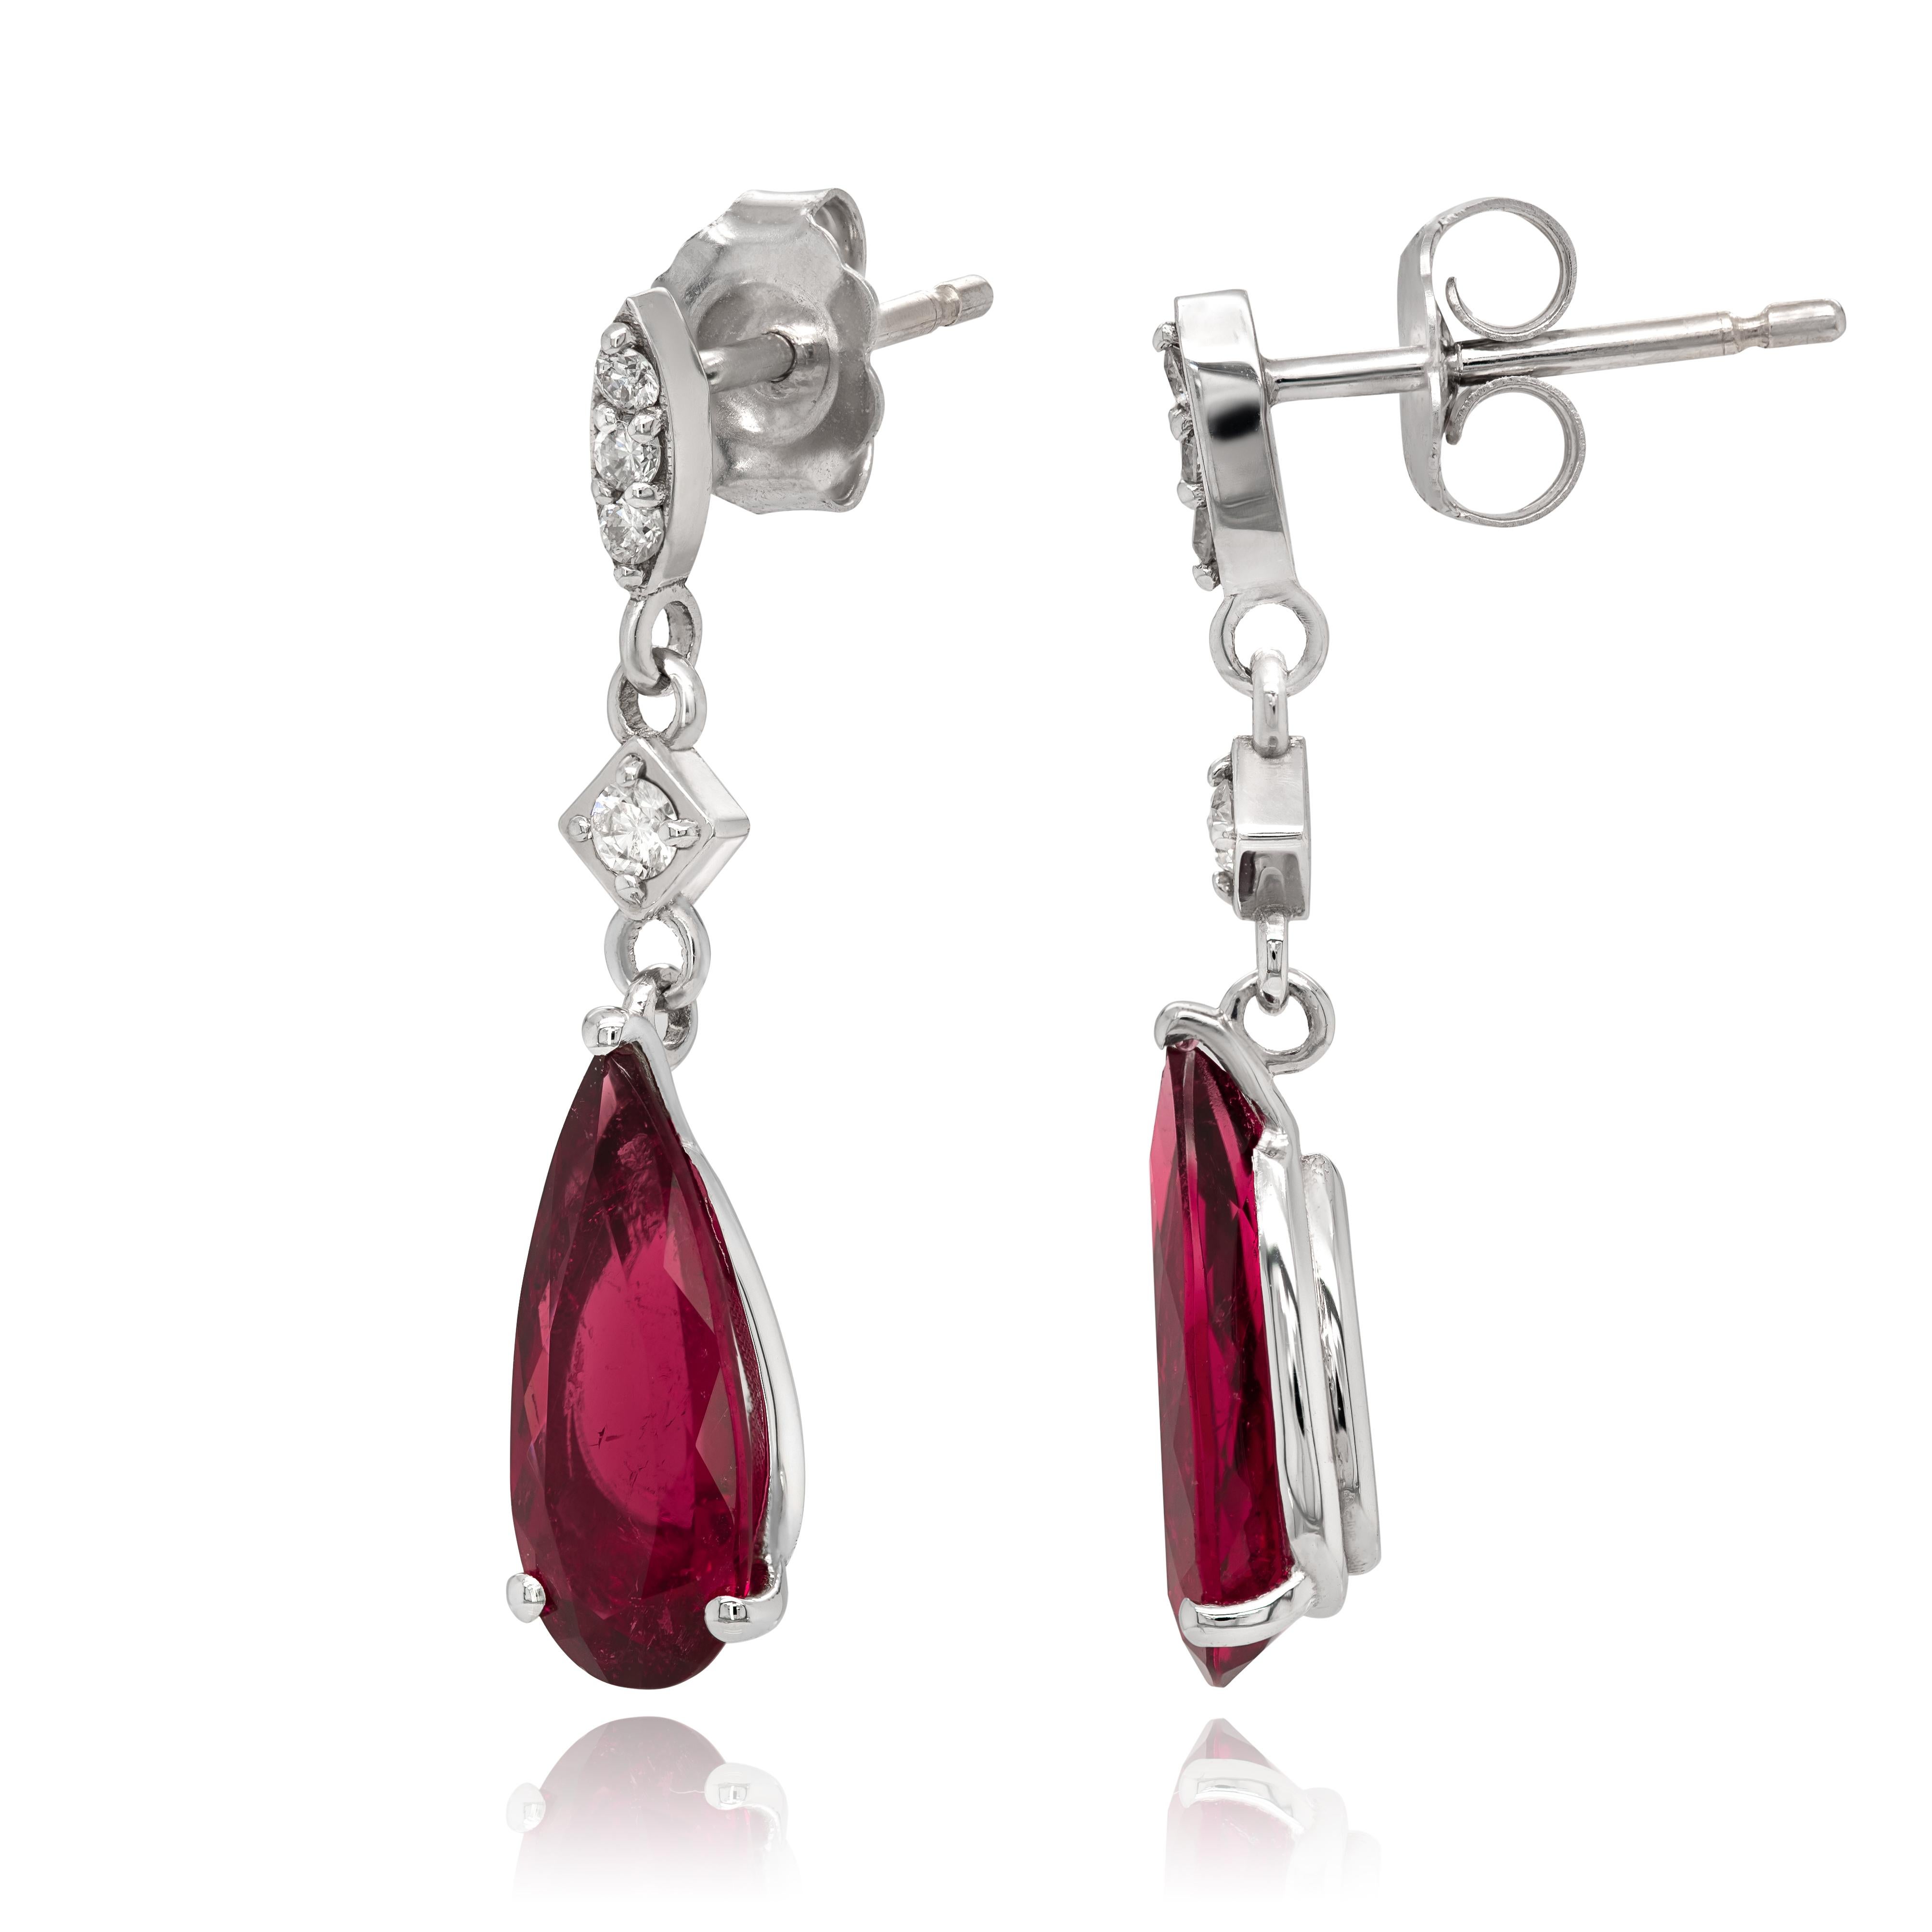 Rubellites are part of the tourmaline family that boasts a vivid fuchsia red color. Filled with a rich bougainvillea purplish red that comes alive thanks to the gems flawless cut, this pair of cascading Rubellite earrings will surely bring a smile